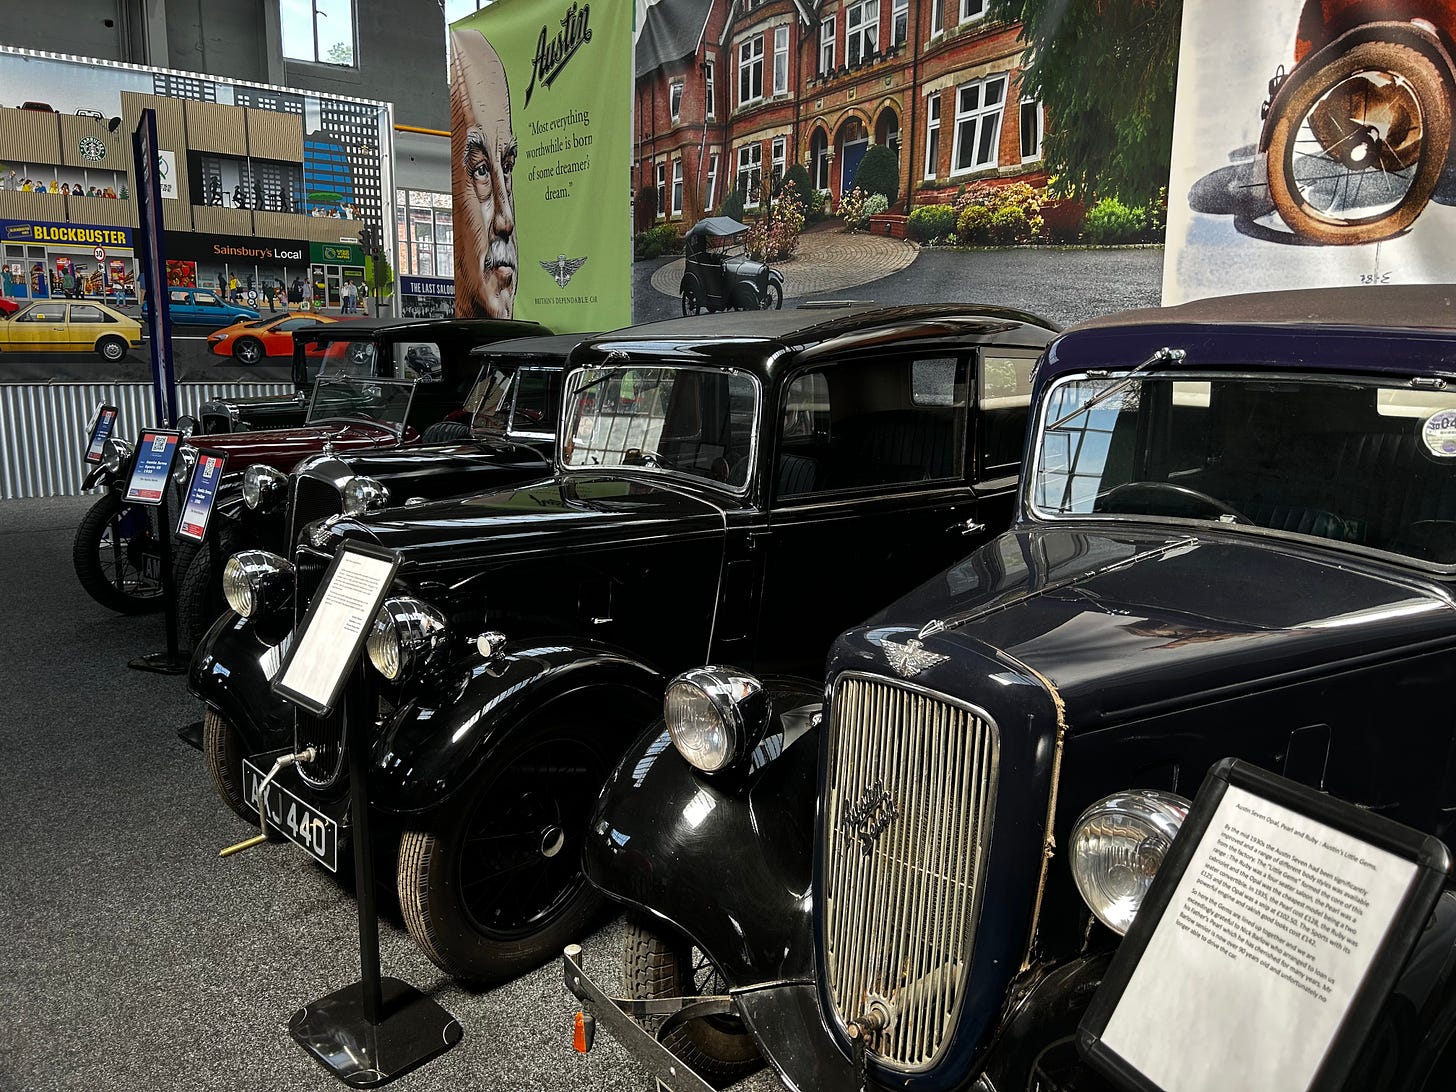 A row of old black Austin cars at the Great British Car Journey. These are located in the main entrance.